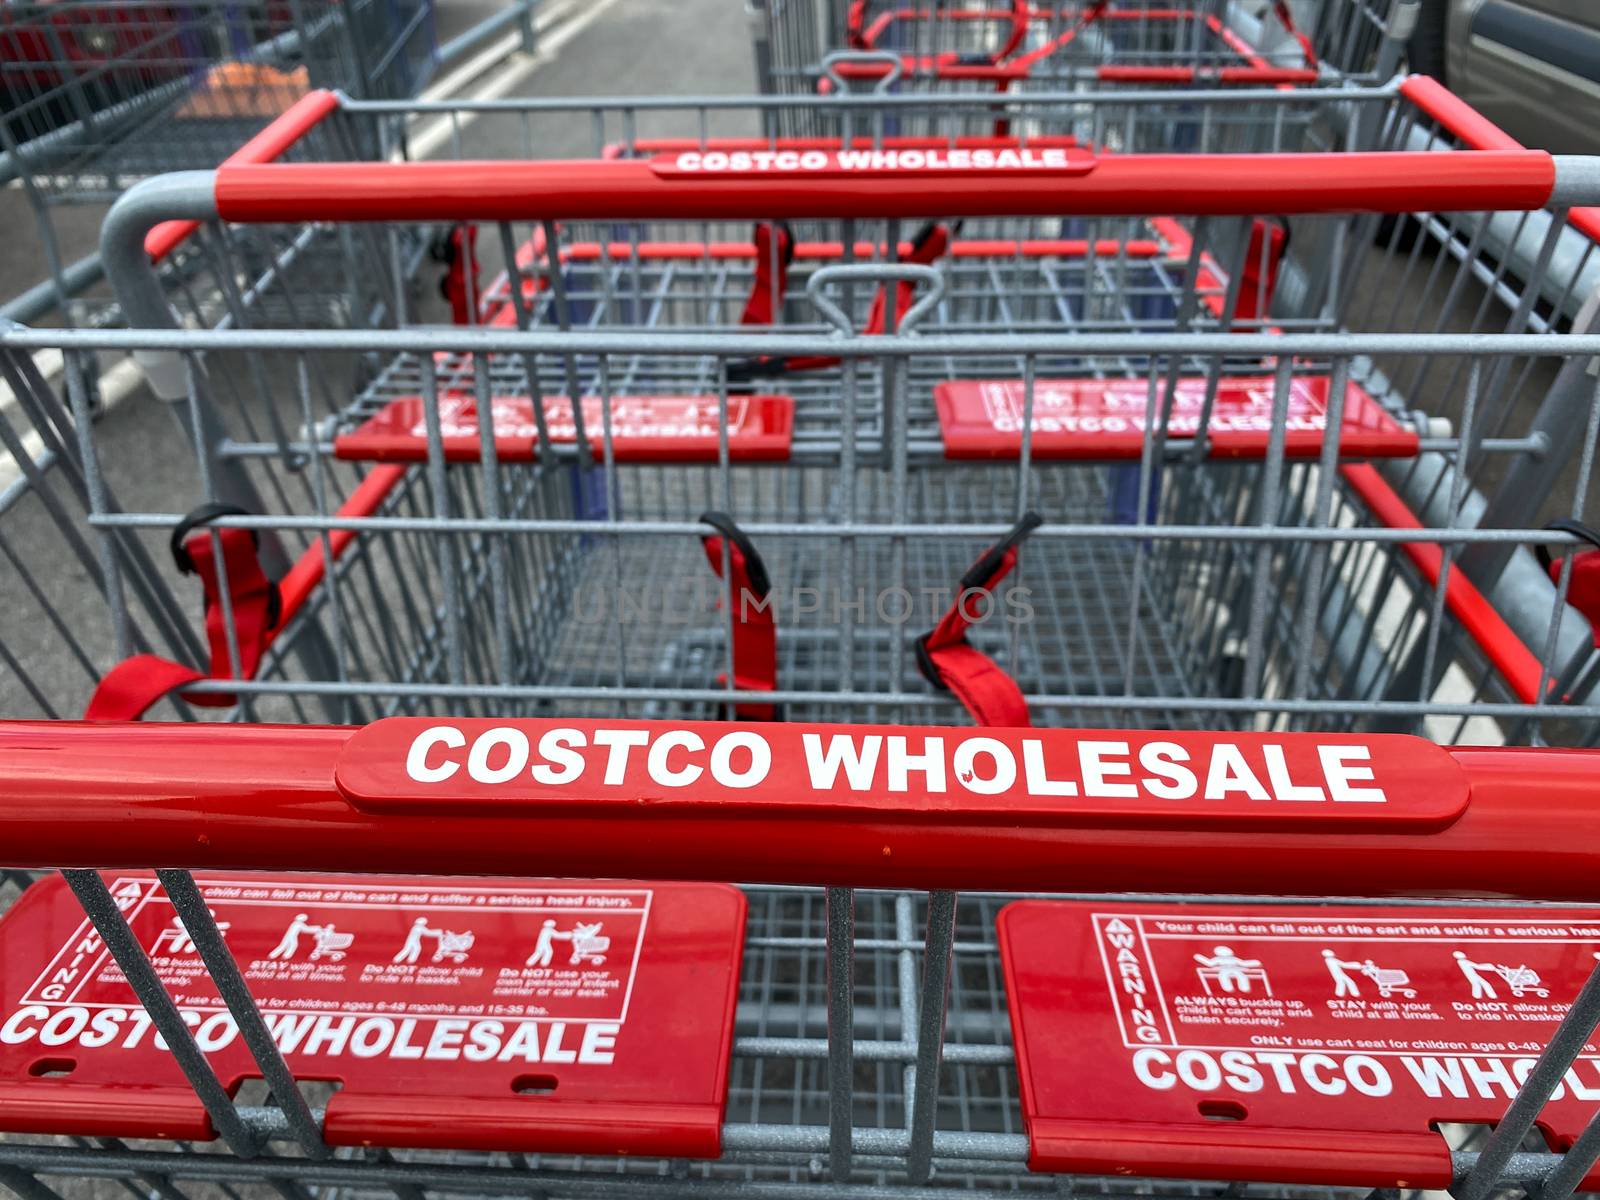 A shopping cart at a Costco Wholesale retail store in Orlando, F by Jshanebutt